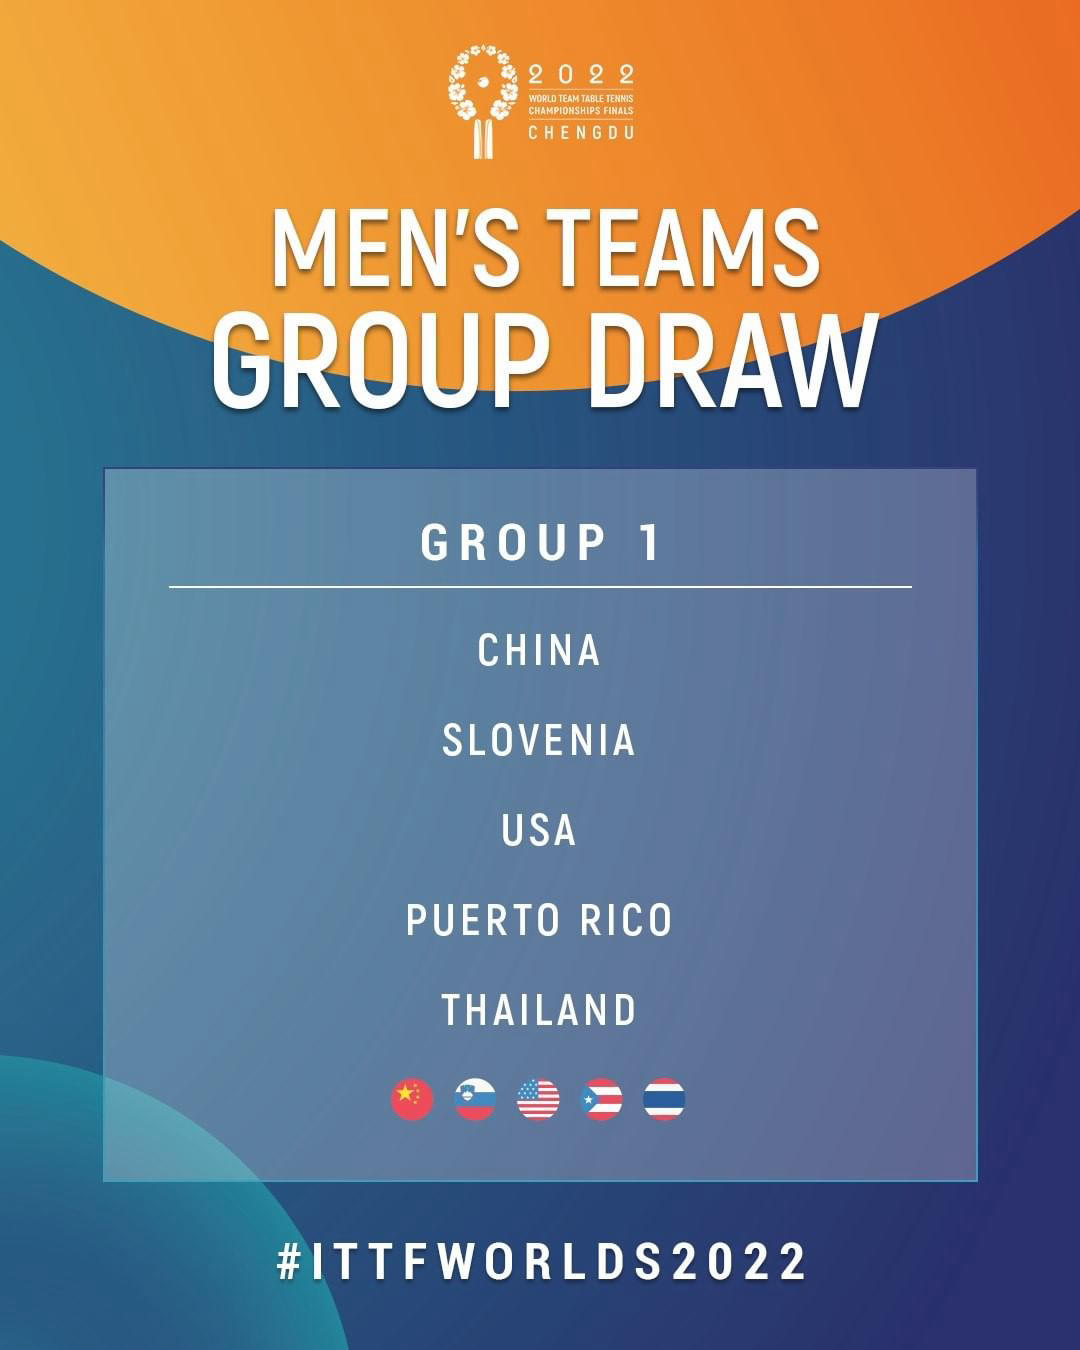 World Table Tennis - The #ITTFWorlds2022 Men's Teams Group Draw has been decided